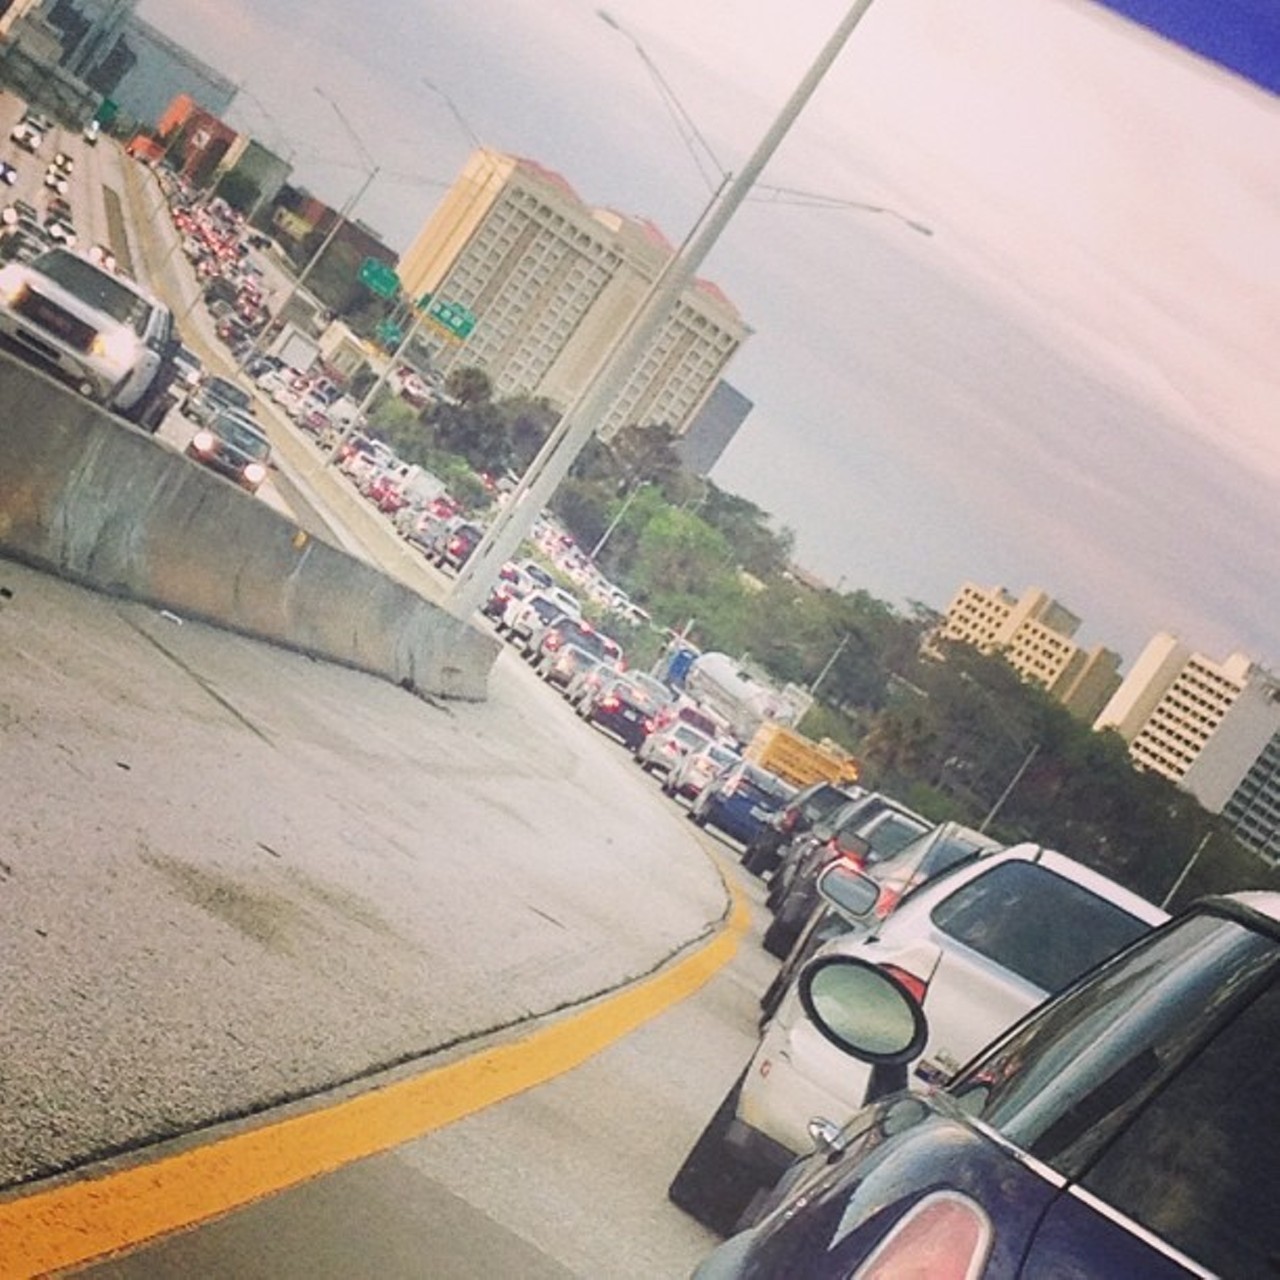 A large portion of Orlando drivers are always making excuses for the traffic
&#147;Well, it&#146;s worse in NYC and NJ, so it&#146;s not thaaat bad.&#148; Yes. Yes, it is.
Photo via davico_o on Instagram